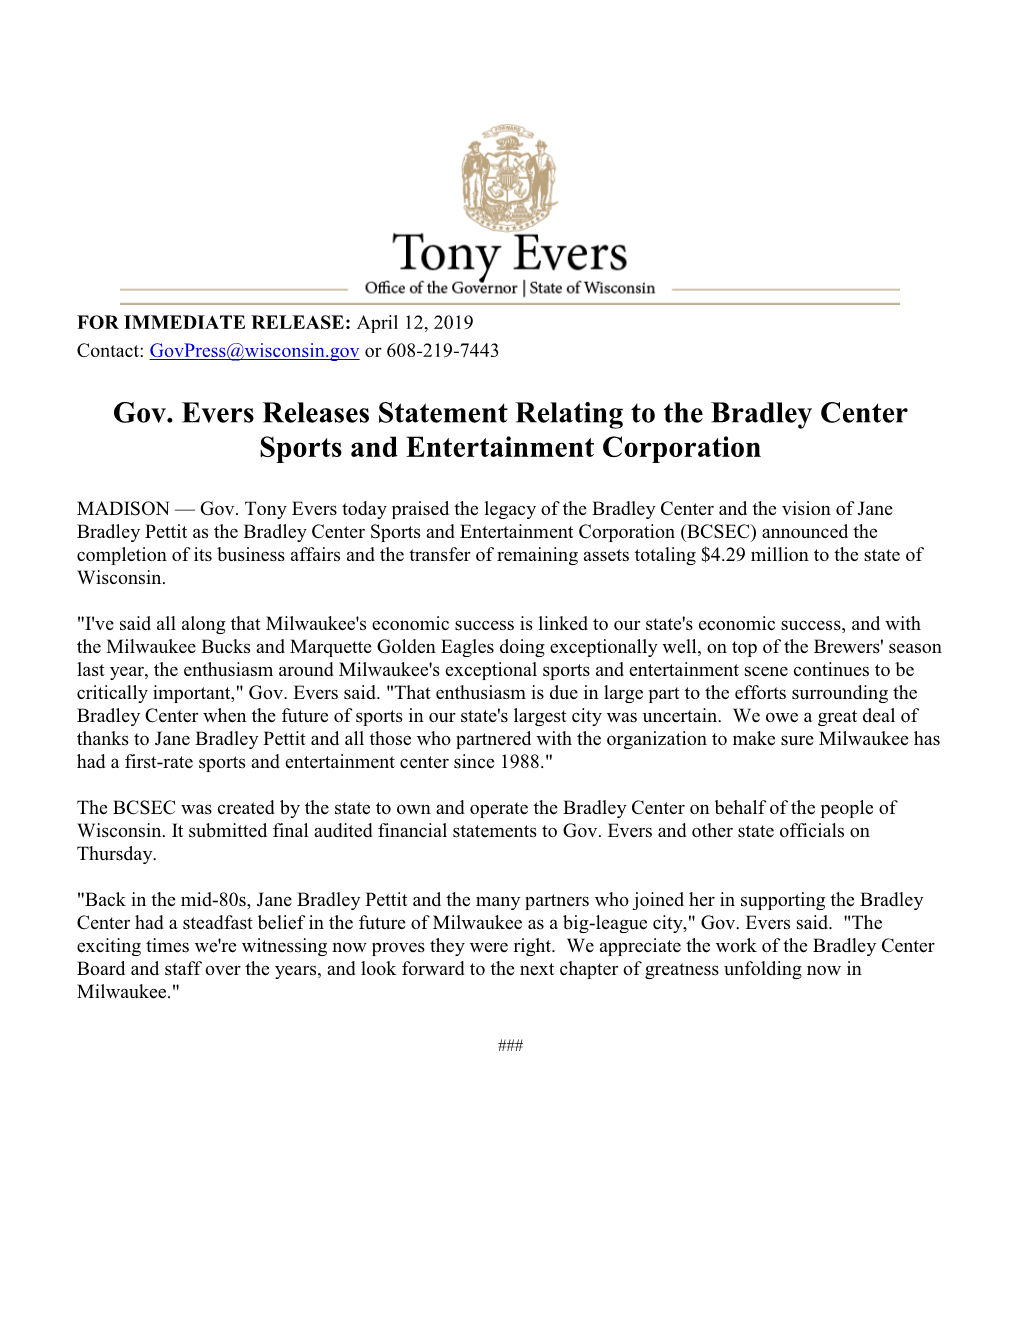 Gov. Evers Releases Statement Relating to the Bradley Center Sports and Entertainment Corporation